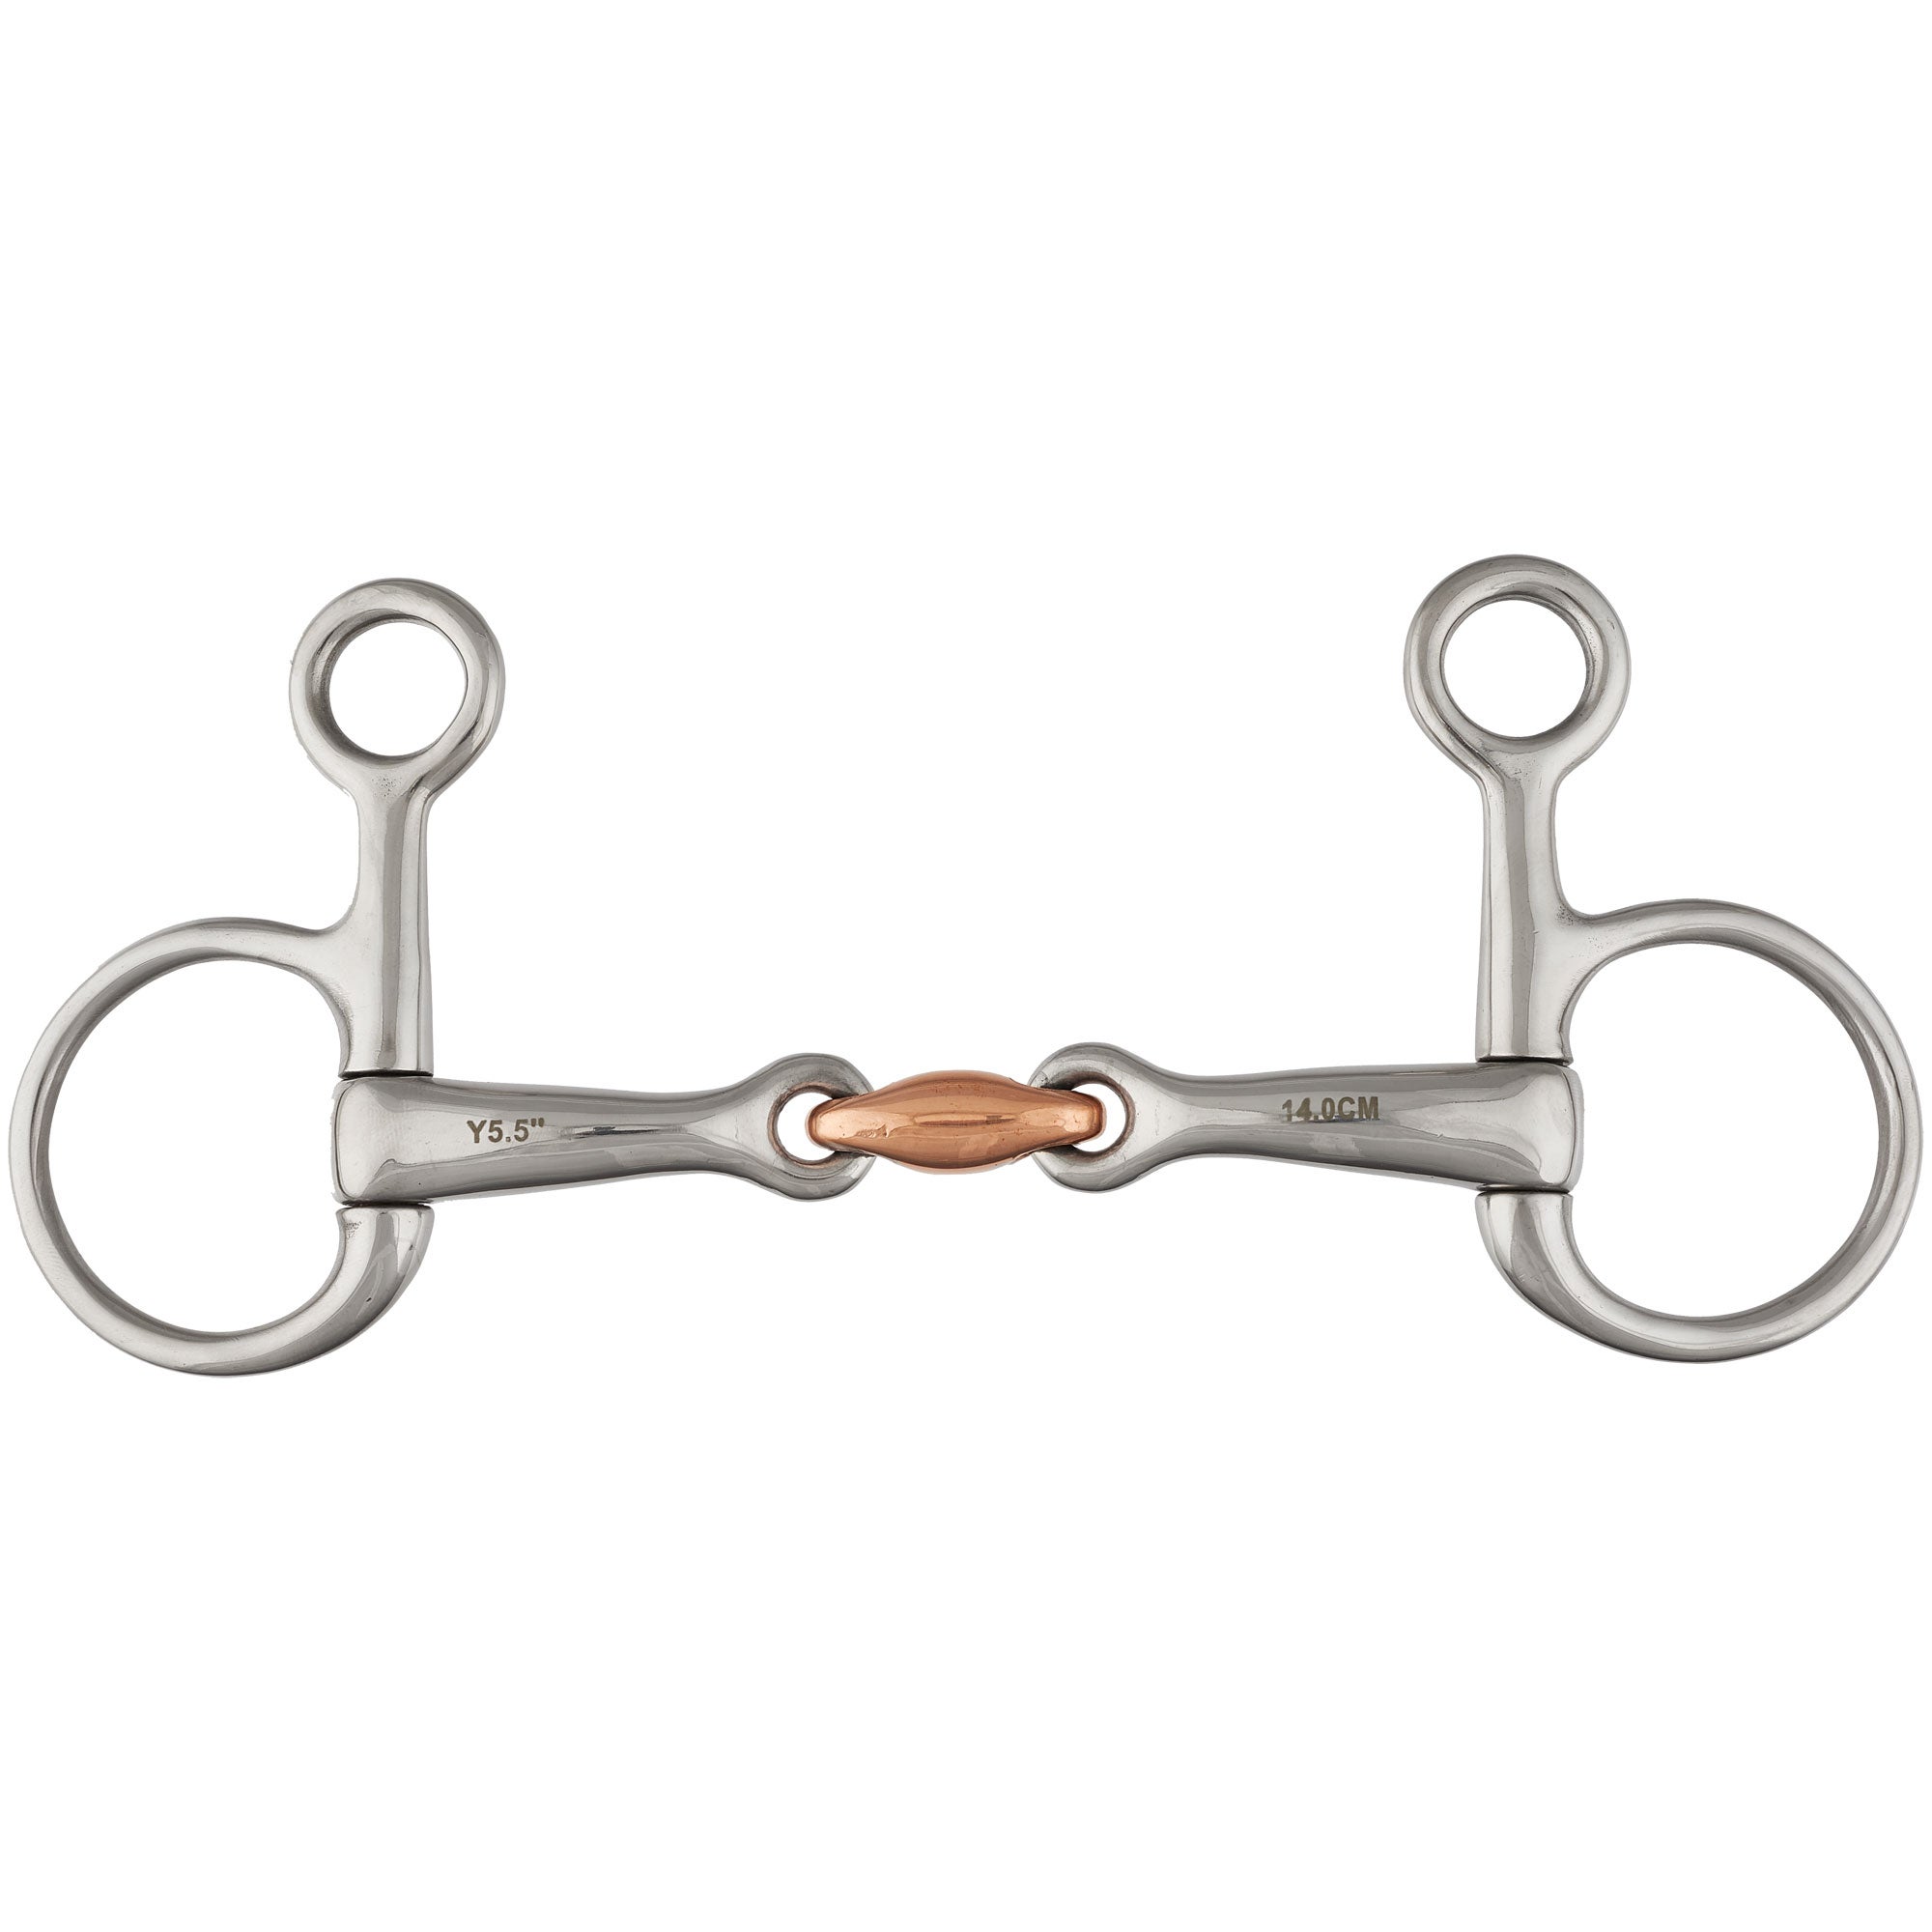 Shires Sweet Iron Hanging Cheek with Copper Lozenge 5.5"-For Horses & Ponies-BN 